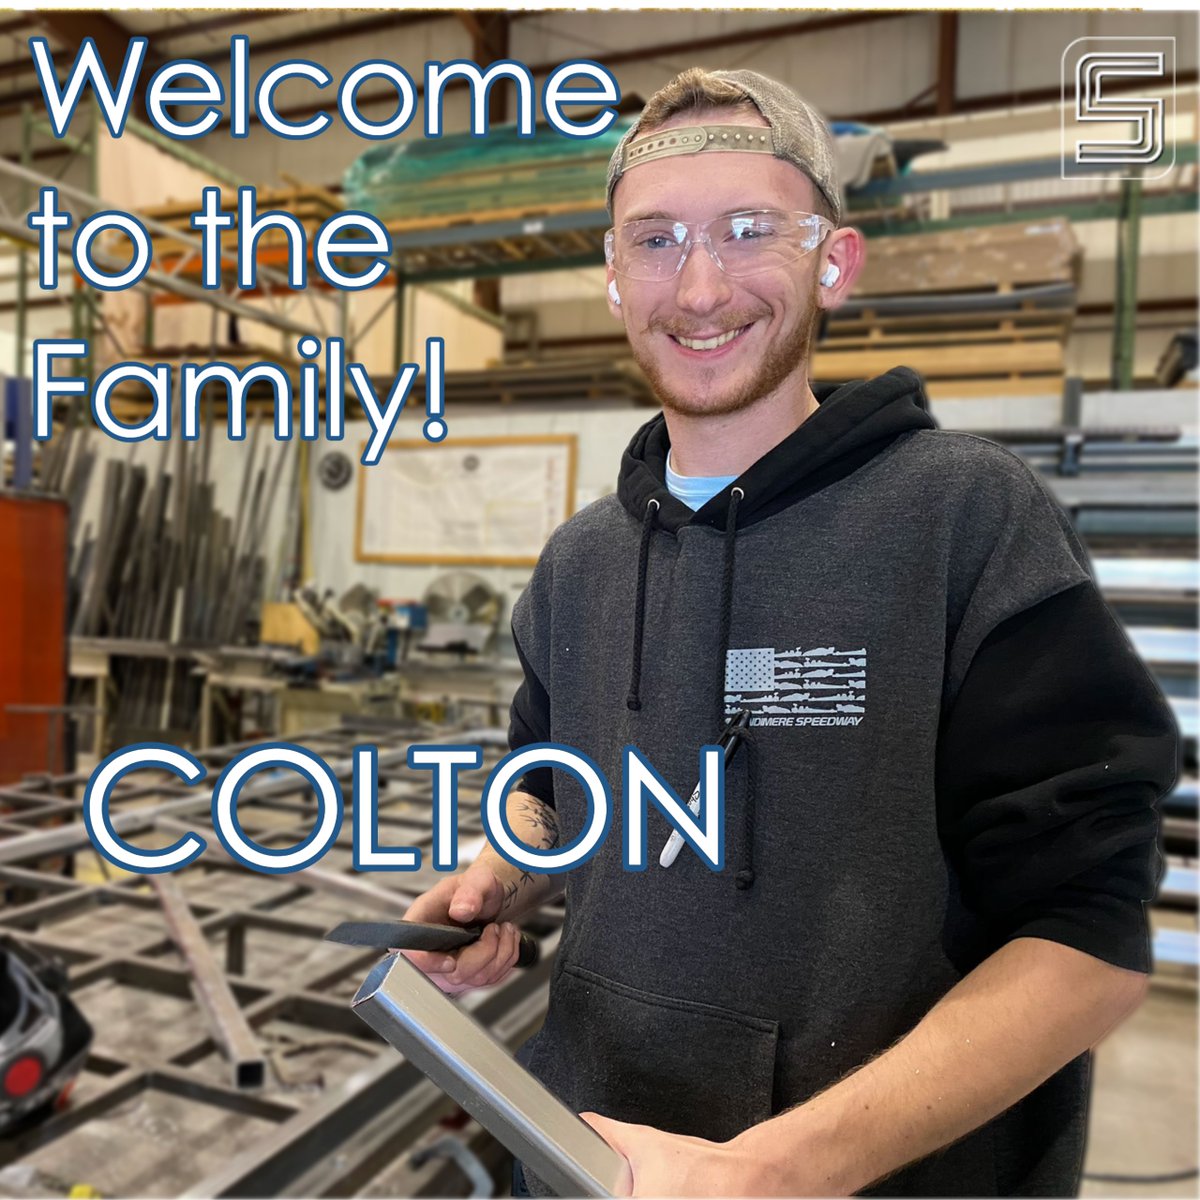 Colton is a new member of our metal dept. He earned his General Welding Certification from the Hobart Institute of Welding Technology, & has multiple certs in MIG, TIG, & stick. Colt is a 'huge car person.'
#WelcomeToTheFamily Colton! 
#EmployeeAppreciation #WeHaveTheSolutions